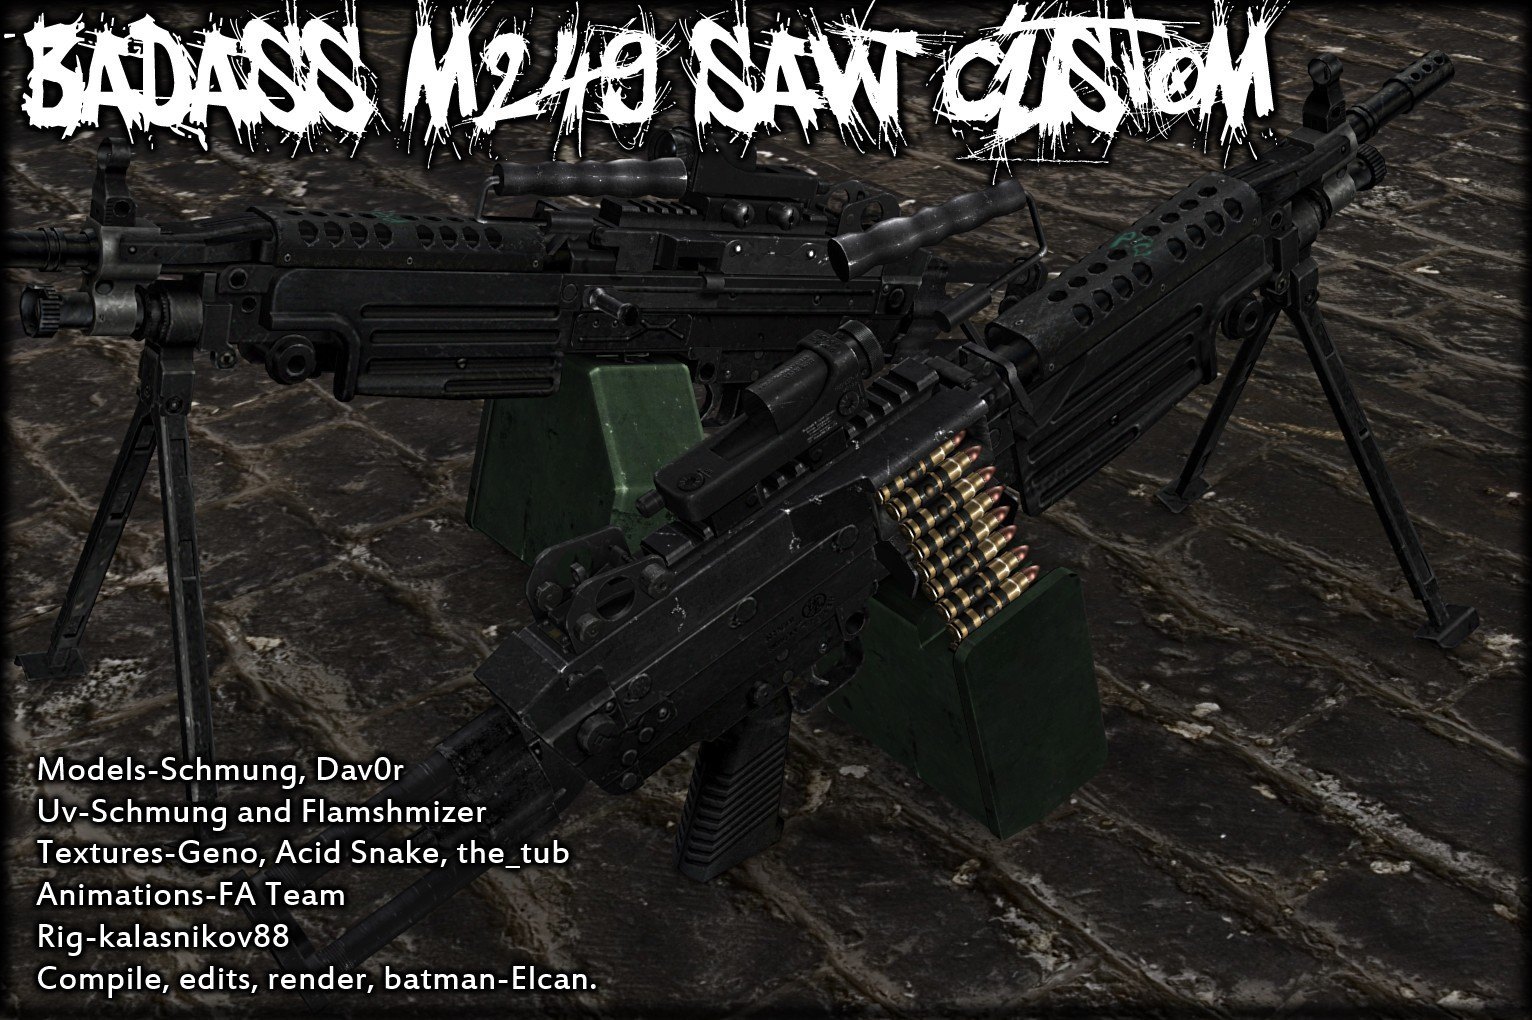 download the new for windows M249 Jungle cs go skin